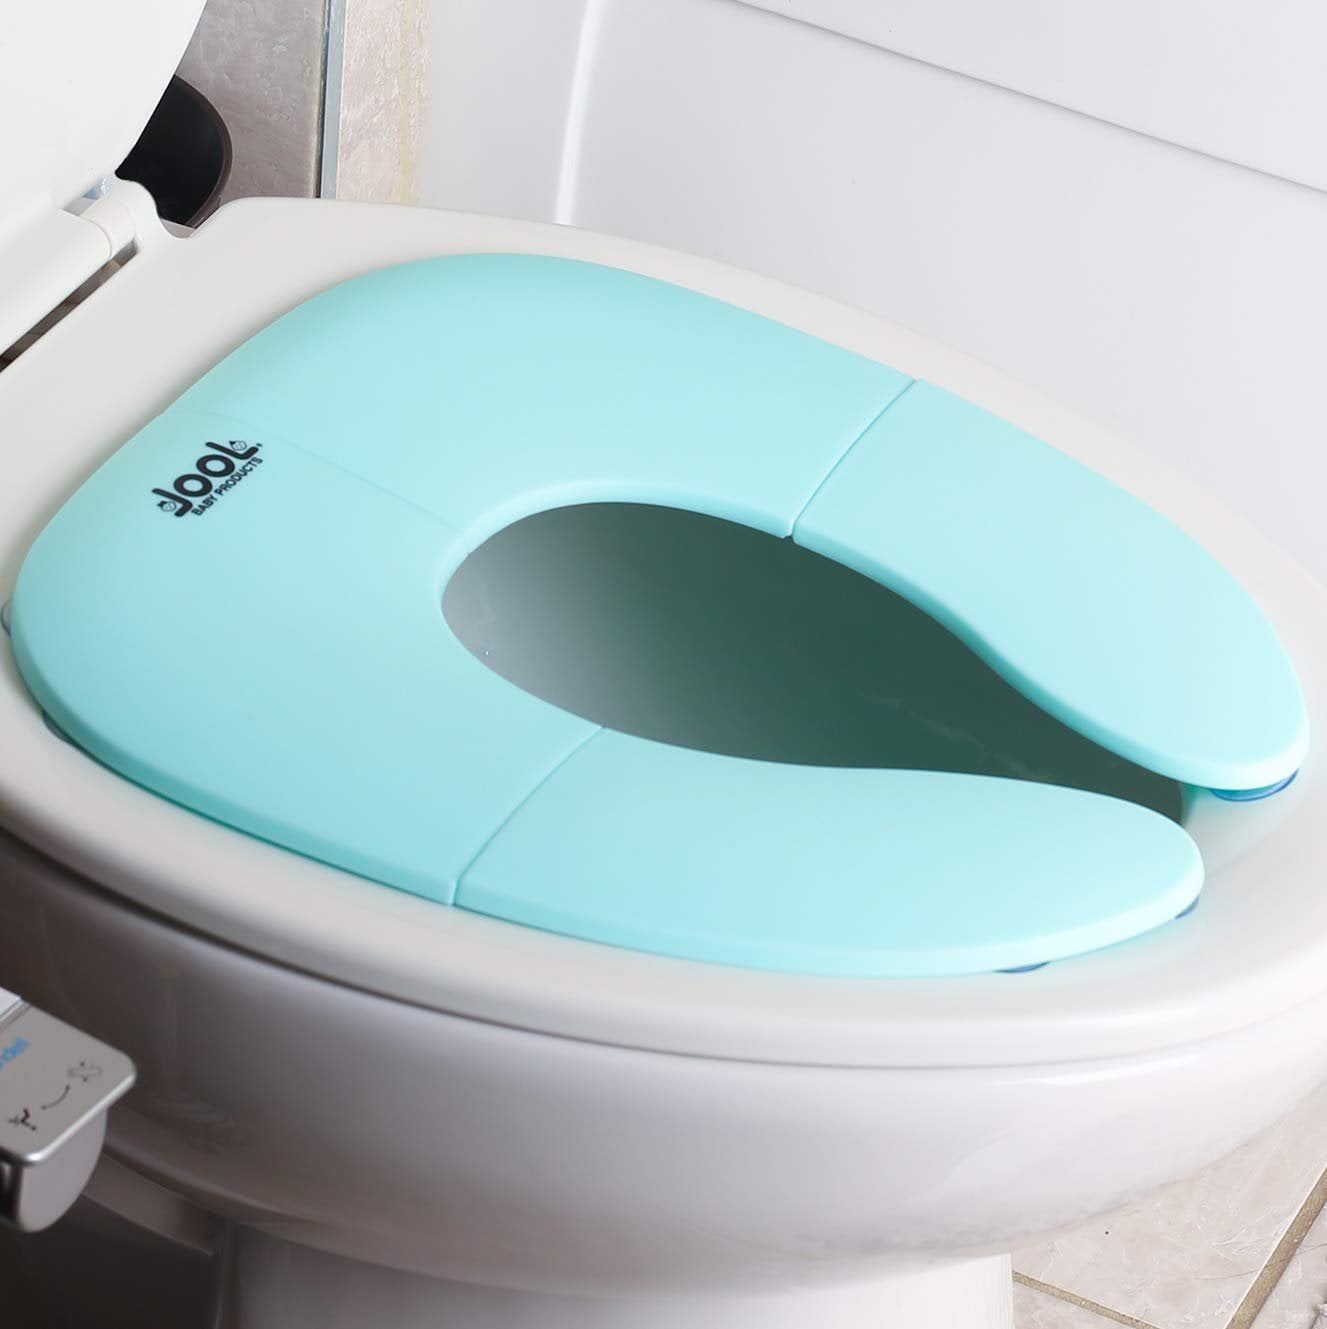 Compac Industries 11200 Safe-t-bumpers Toilet Seat Stabilizers for sale online 